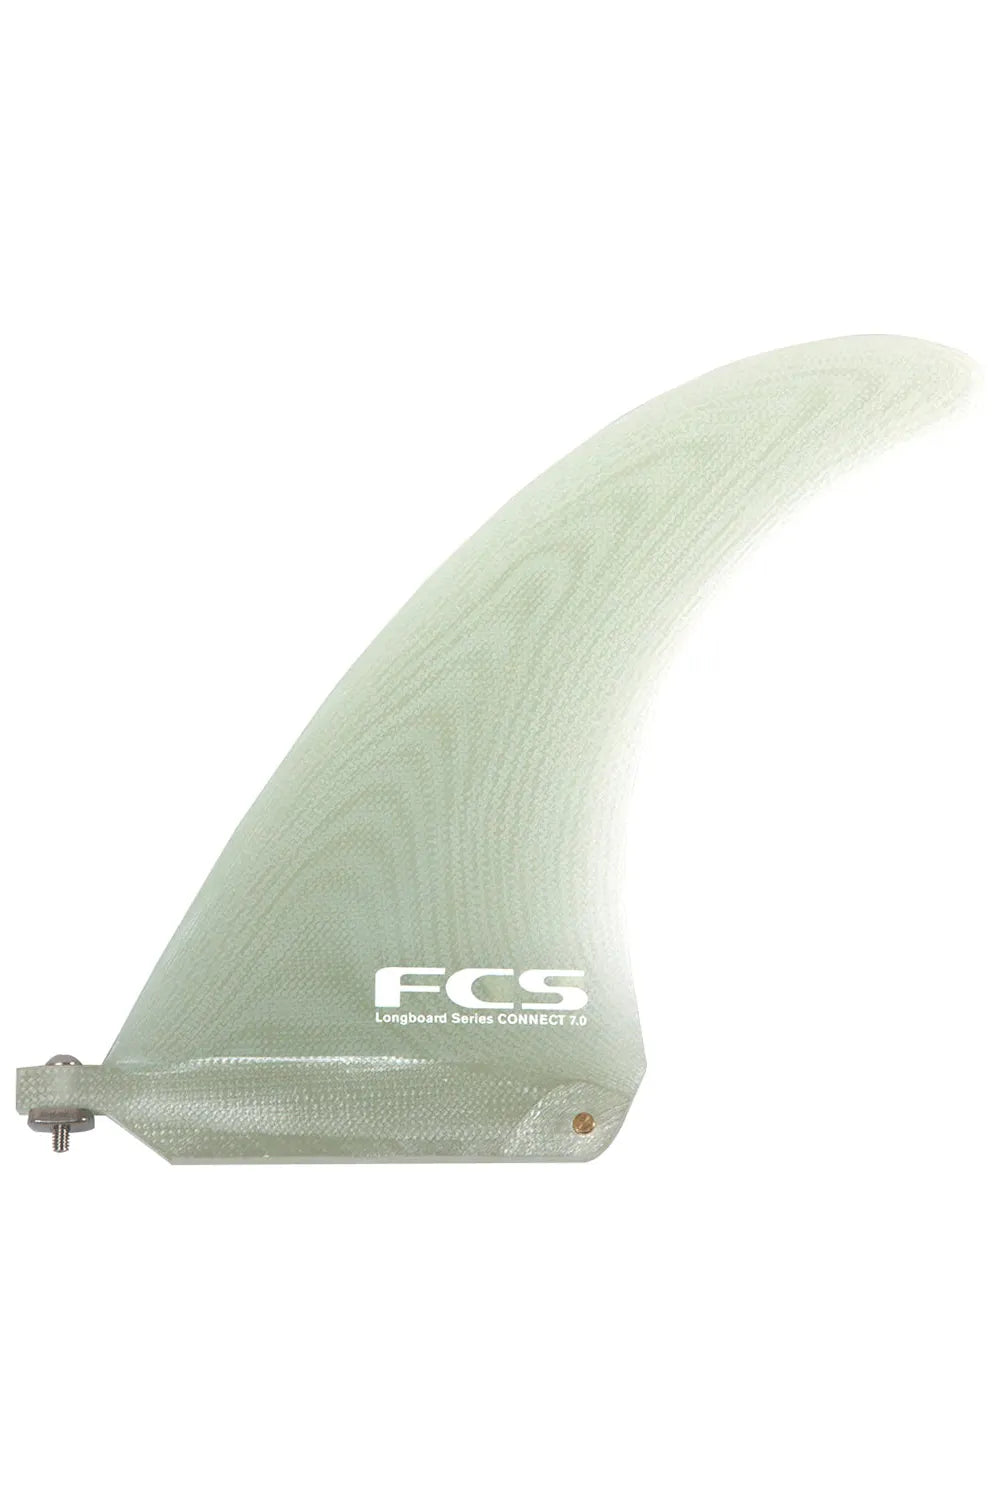 FCS Connect Screw & Plate Pg 9" Fin